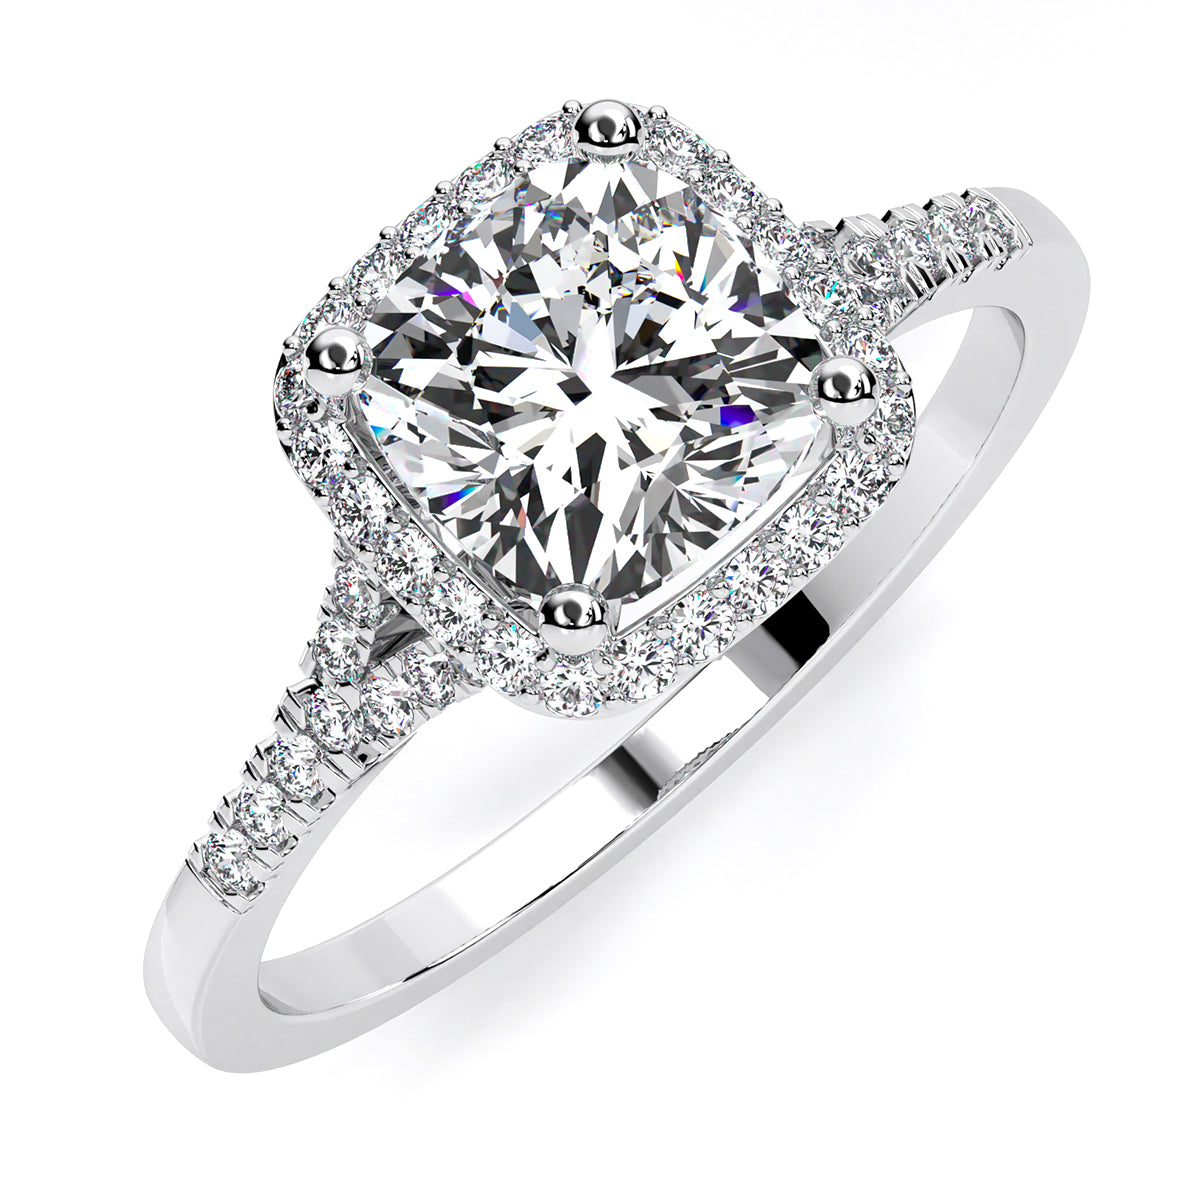 Daily Deal: 2.35ct TCW Cushion Diamond Engagement Ring